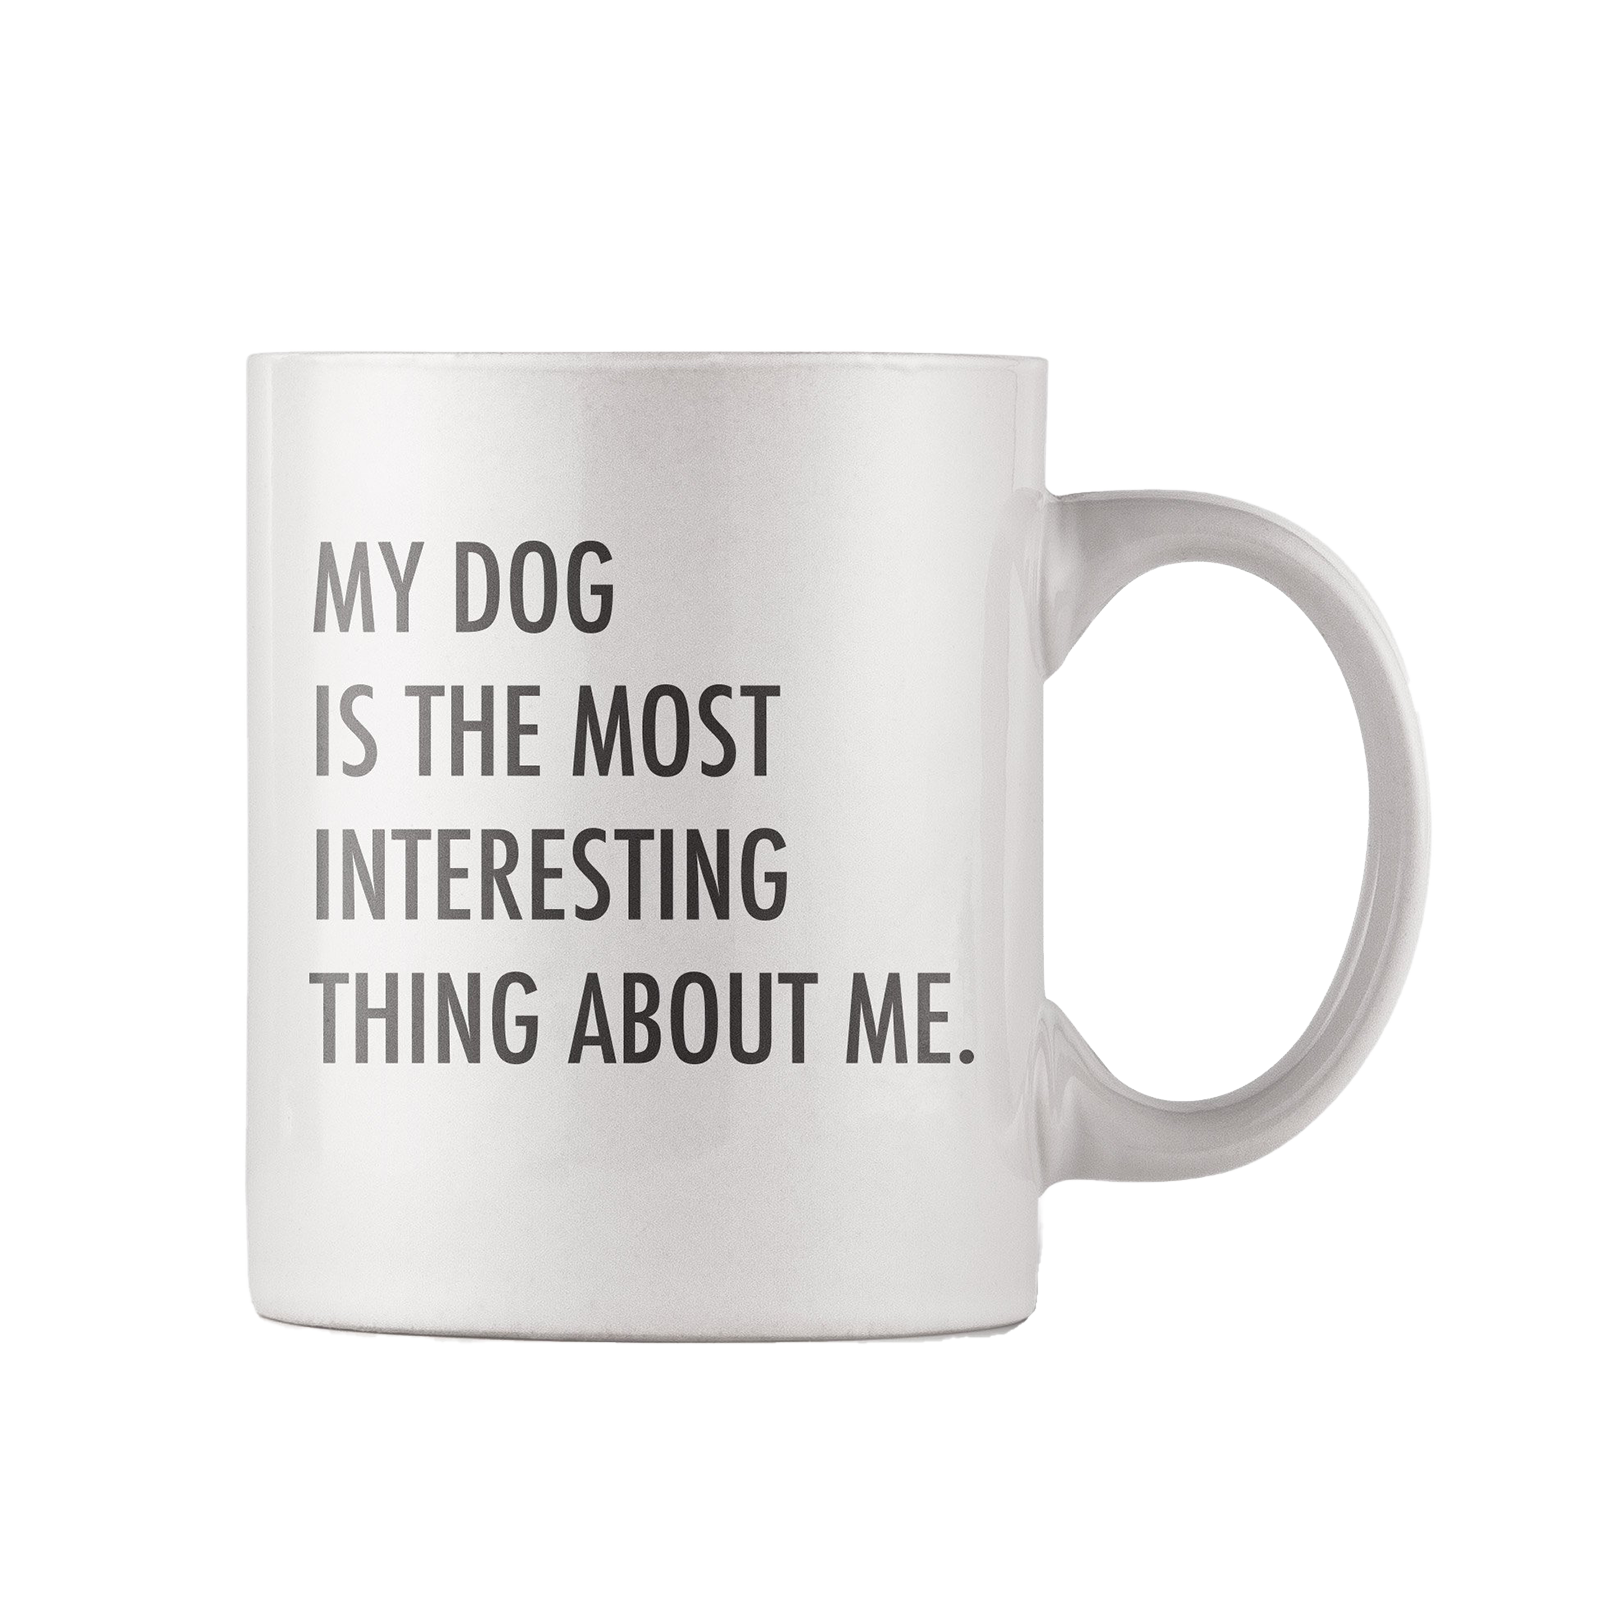 "My Dog is the Most Interesting Thing About Me" Mug